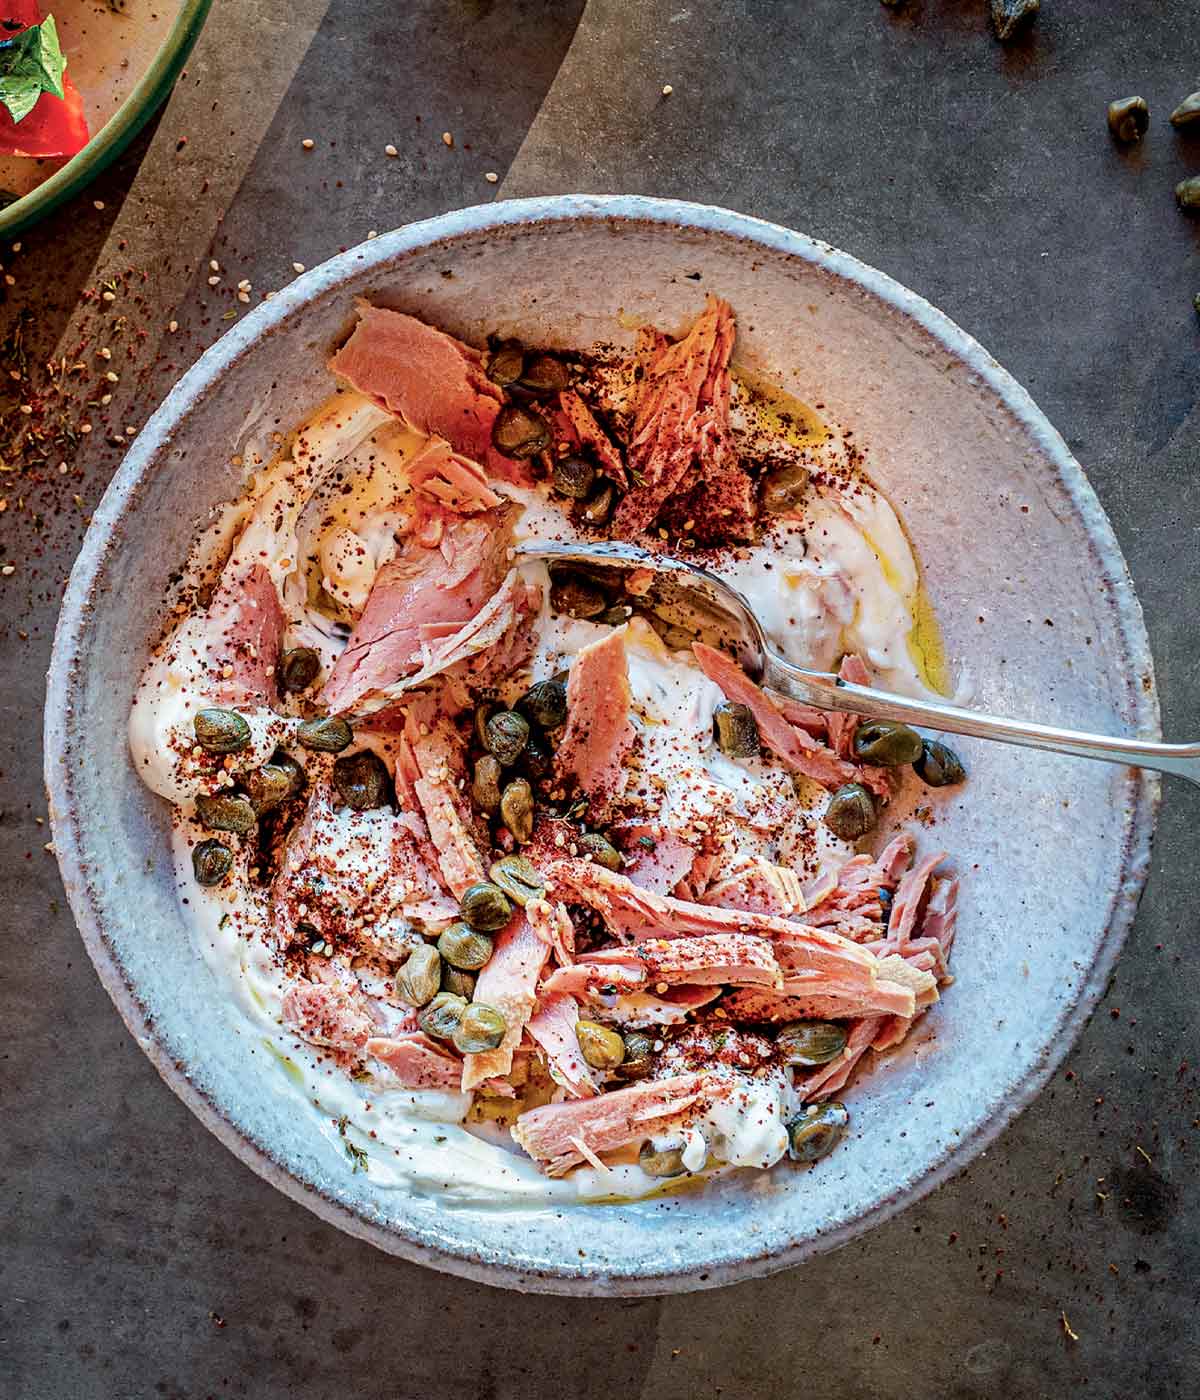 A pottery bowl filled with tuna salad, yogurt, olive oil, capers, and za'atar.